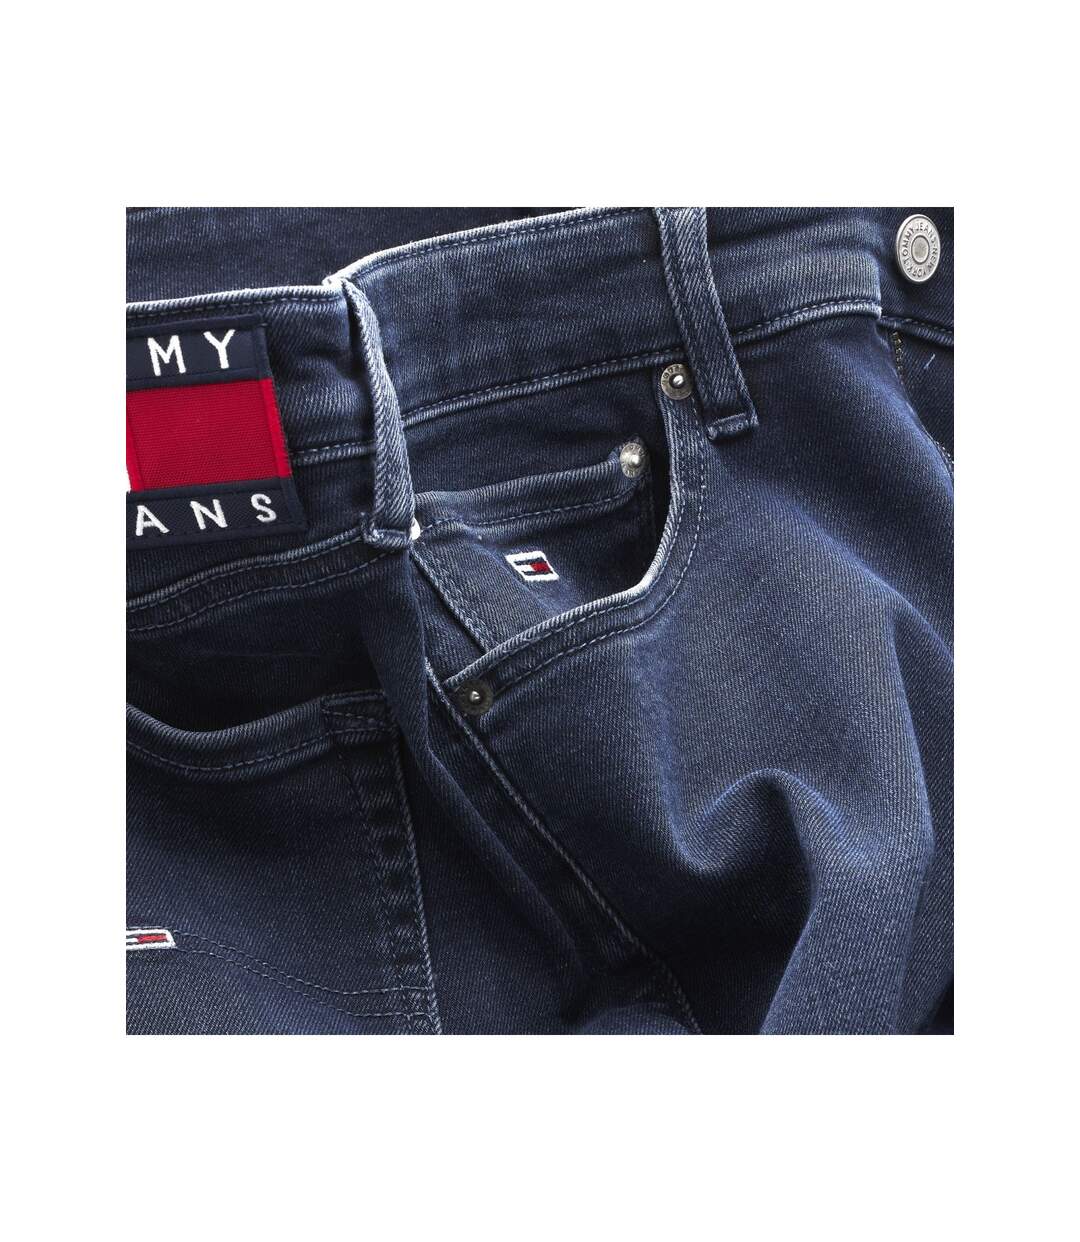 Jean slim stretch Scanton  -  Tommy Jeans - Homme